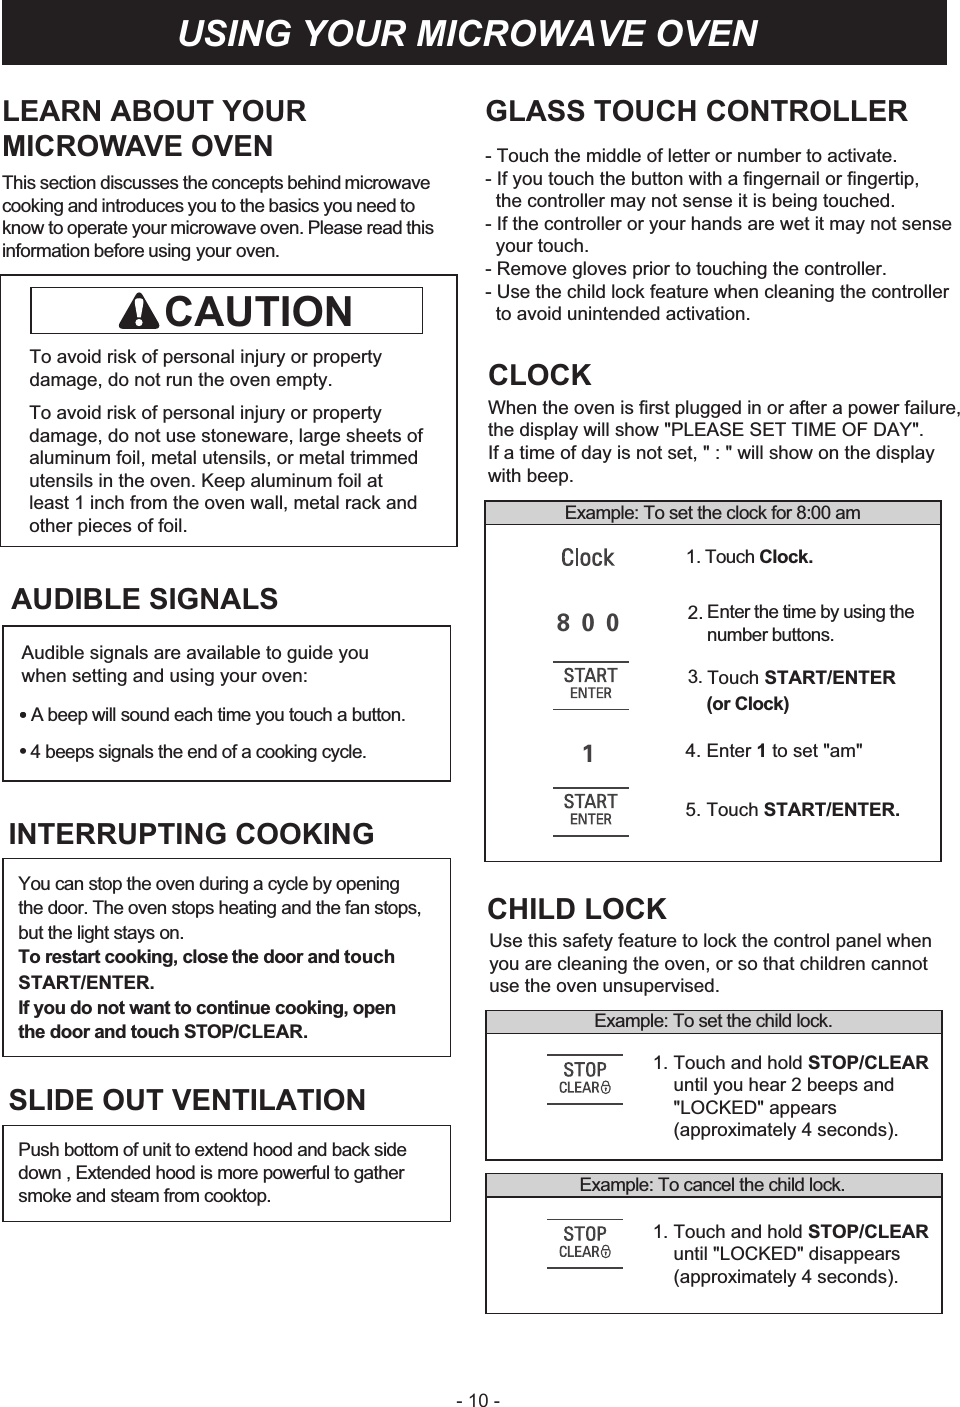 - 10 -LEARN ABOUT YOURMICROWAVE OVENThis section discusses the concepts behind GLASS TOUCH CONTROLLER- Touch the middle of letter or number to activate.- If you touch the button with a fingernail or fingertip,  the controller may not sense it is being touched.- If the controller or your hands are wet it may not sense   your touch.- Remove gloves prior to touching the controller.- Use the child lock feature when cleaning the controller   to avoid unintended activation.microwave cooking and introduces you to the basics you need to know to operate your microwave oven. Please read this information before using your oven.To avoid risk of personal injury or property damage, do not run the oven empty.To avoid risk of personal injury or property damage, do not use stoneware, large sheets of aluminum foil, metal utensils, or metal trimmed utensils in the oven. Keep aluminum foil at least 1 inch from the oven wall, metal rack and other pieces of foil. Example: To set the clock for 8:00 amCLOCKWhen the oven is first plugged in or after a power failure,the display will show &quot;PLEASE SET TIME OF DAY&quot;. If a time of day is not set, &quot; : &quot; will show on the display with beep.2. Enter the time by using thenumber buttons.4. Enter 1 to set &quot;am&quot;5. Touch START/ENTER.1. Touch Clock.3. Touch START/ENTER(or Clock)Example: To set the child lock.1. Touch and hold STOP/CLEAR     until you hear 2 beeps and     &quot;LOCKED&quot; appears    (approximately 4 seconds).1. Touch and hold STOP/CLEAR     until &quot;LOCKED&quot; disappears    (approximately 4 seconds).Example: To cancel the child lock.CHILD LOCKUse this safety feature to lock the control panel whenyou are cleaning the oven, or so that children cannotuse the oven unsupervised.USING YOUR MICROWAVE OVENCAUTIONAUDIBLE SIGNALS•A beep will sound each time you touch a button.4 beeps signals the end of a cooking cycle.You can stop the oven during a cycle by opening the door. The oven stops heating and the fan stops, but the light stays on.To restart cooking, close the door and touchSTART/ENTER.If you do not want to continue cooking, open the door and touch STOP/CLEAR.INTERRUPTING COOKINGPush bottom of unit to extend hood and back side down , Extended hood is more powerful to gather smoke and steam from cooktop.SLIDE OUT VENTILATIONAudible signals are available to guide you when setting and using your oven:••8 0 01